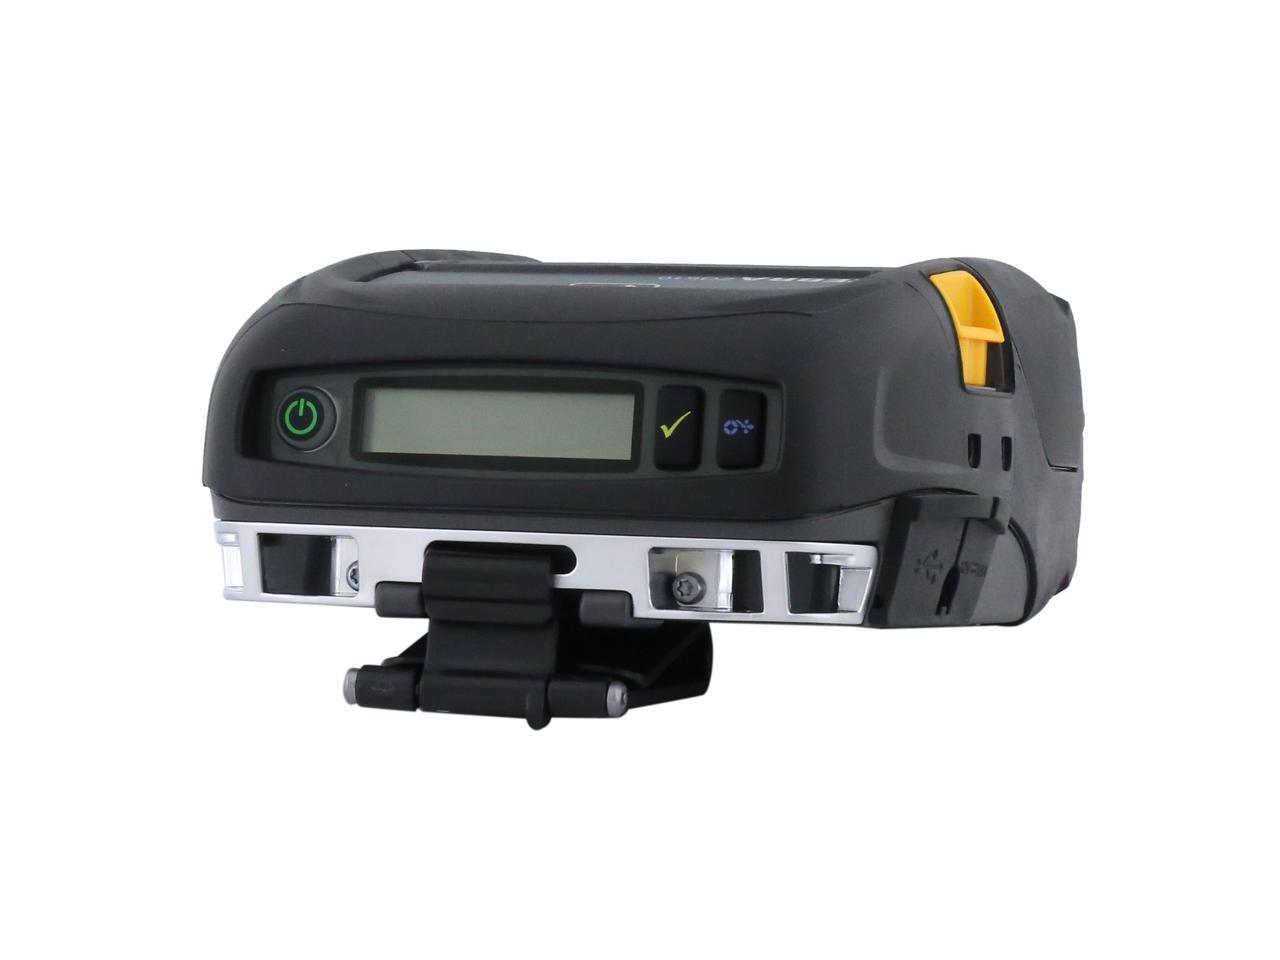 Zebra Zq510 3 Mobile Direct Thermal Receipt And Label Printer 203 Dpi Bluetooth 40 Linered 0470